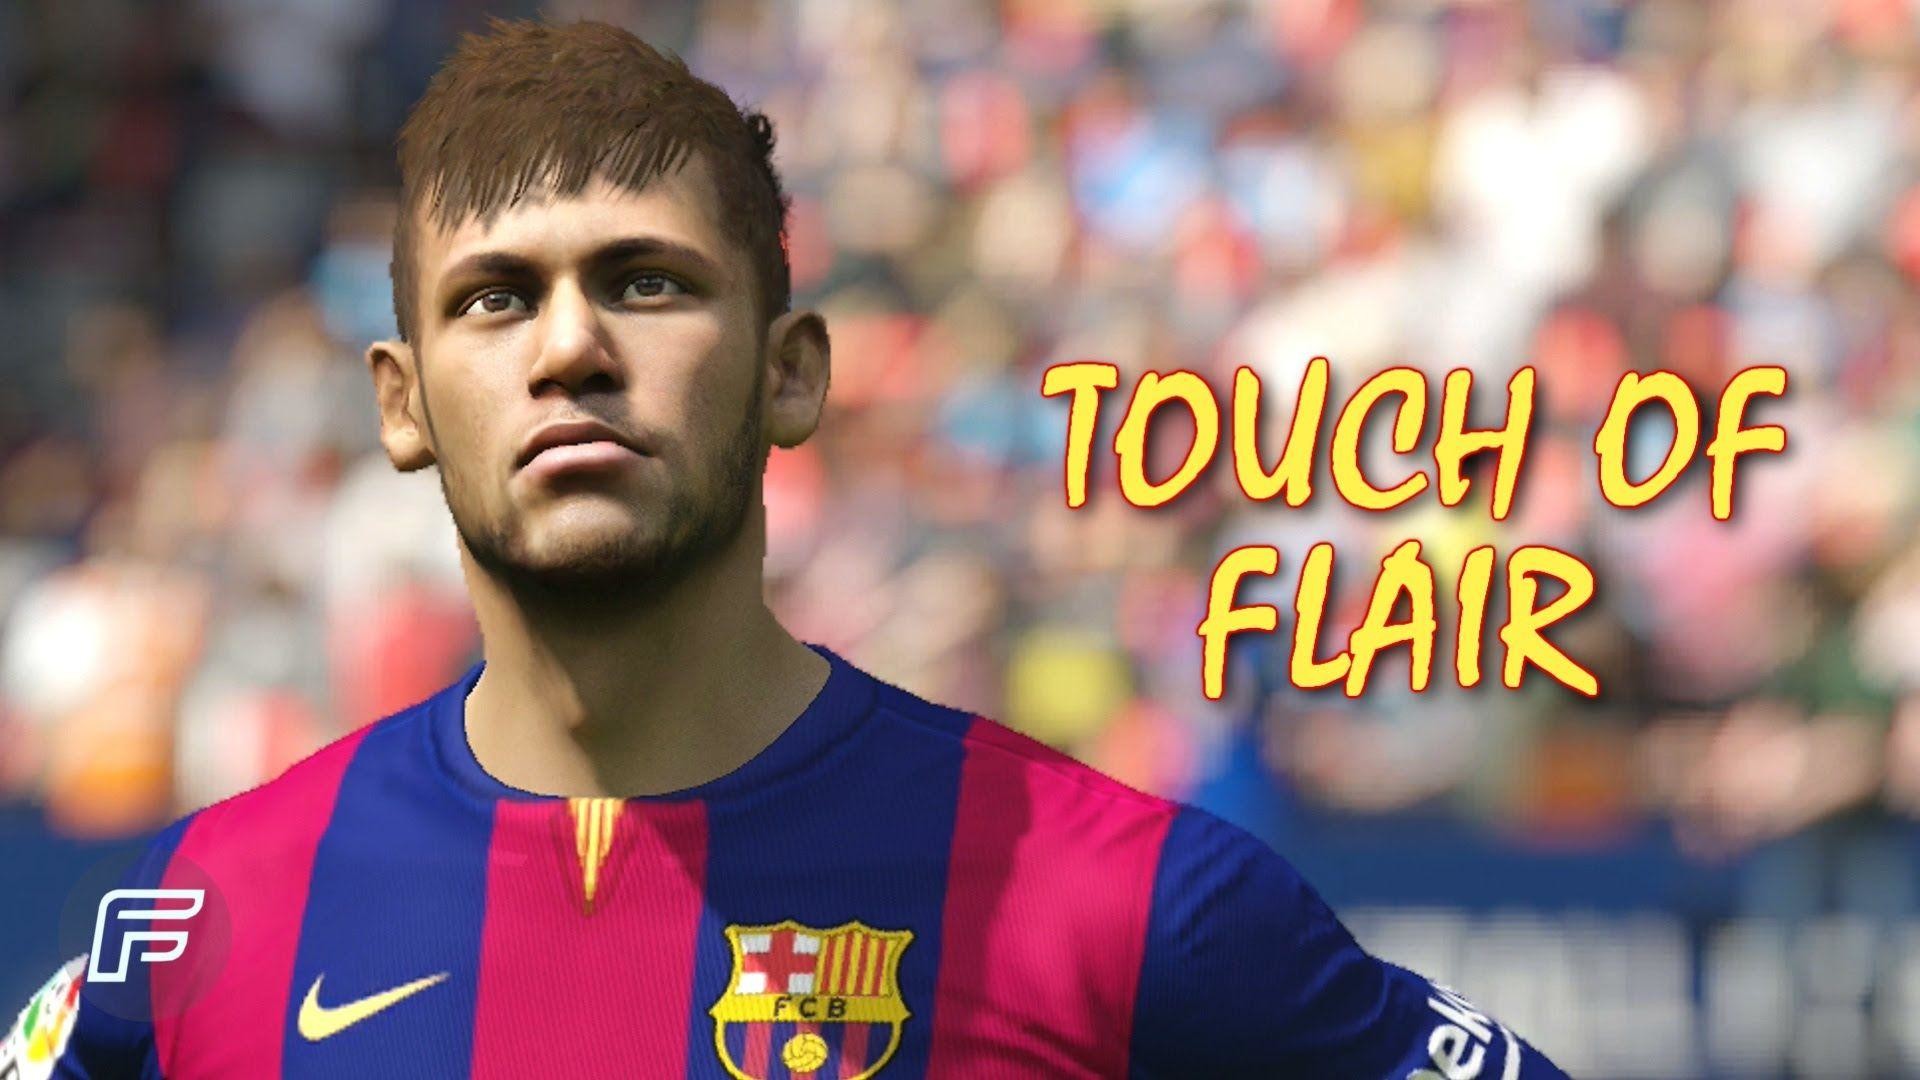 1920x1080 Neymar Jr. "Touch of Flair" (FIFA 15 Edit) - Collaboration with